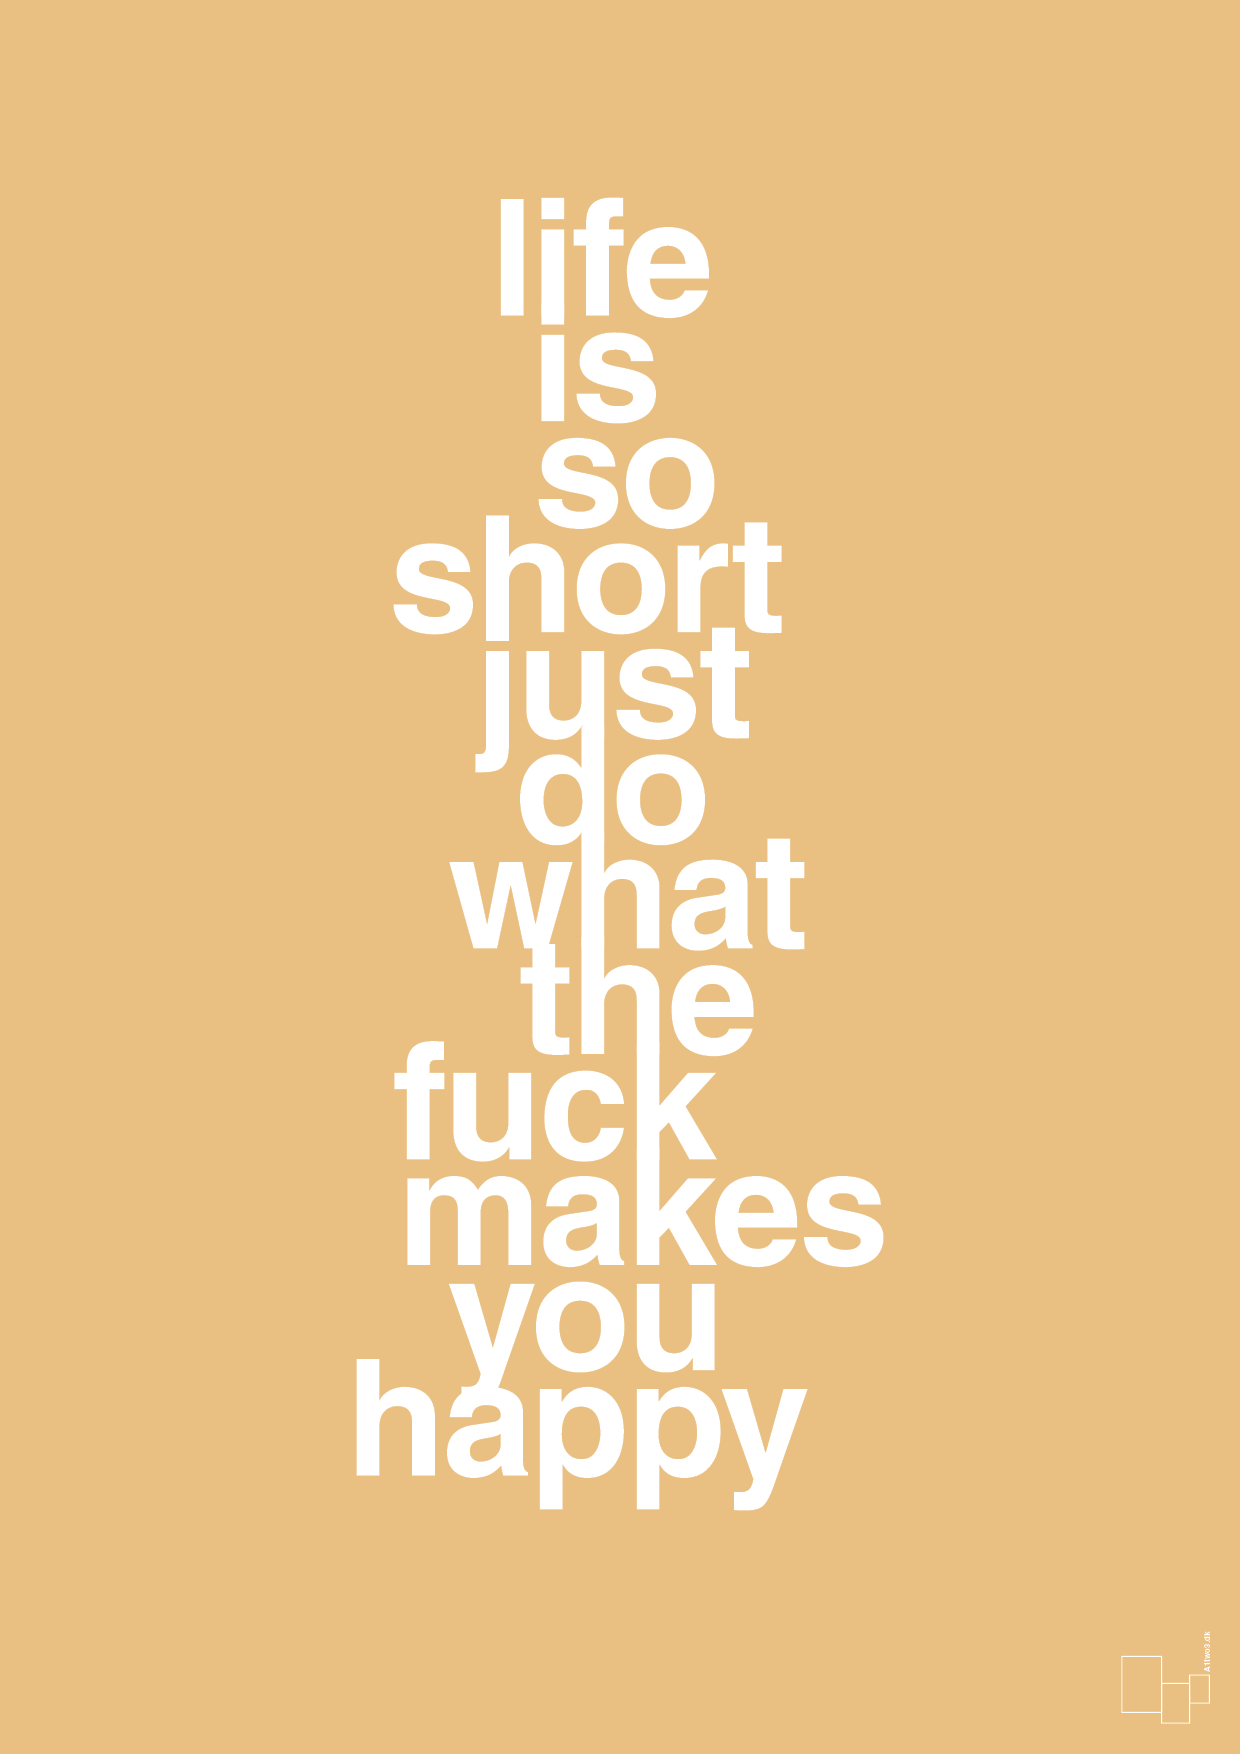 life is so short just do what the fuck makes you happy - Plakat med Ordsprog i Charismatic